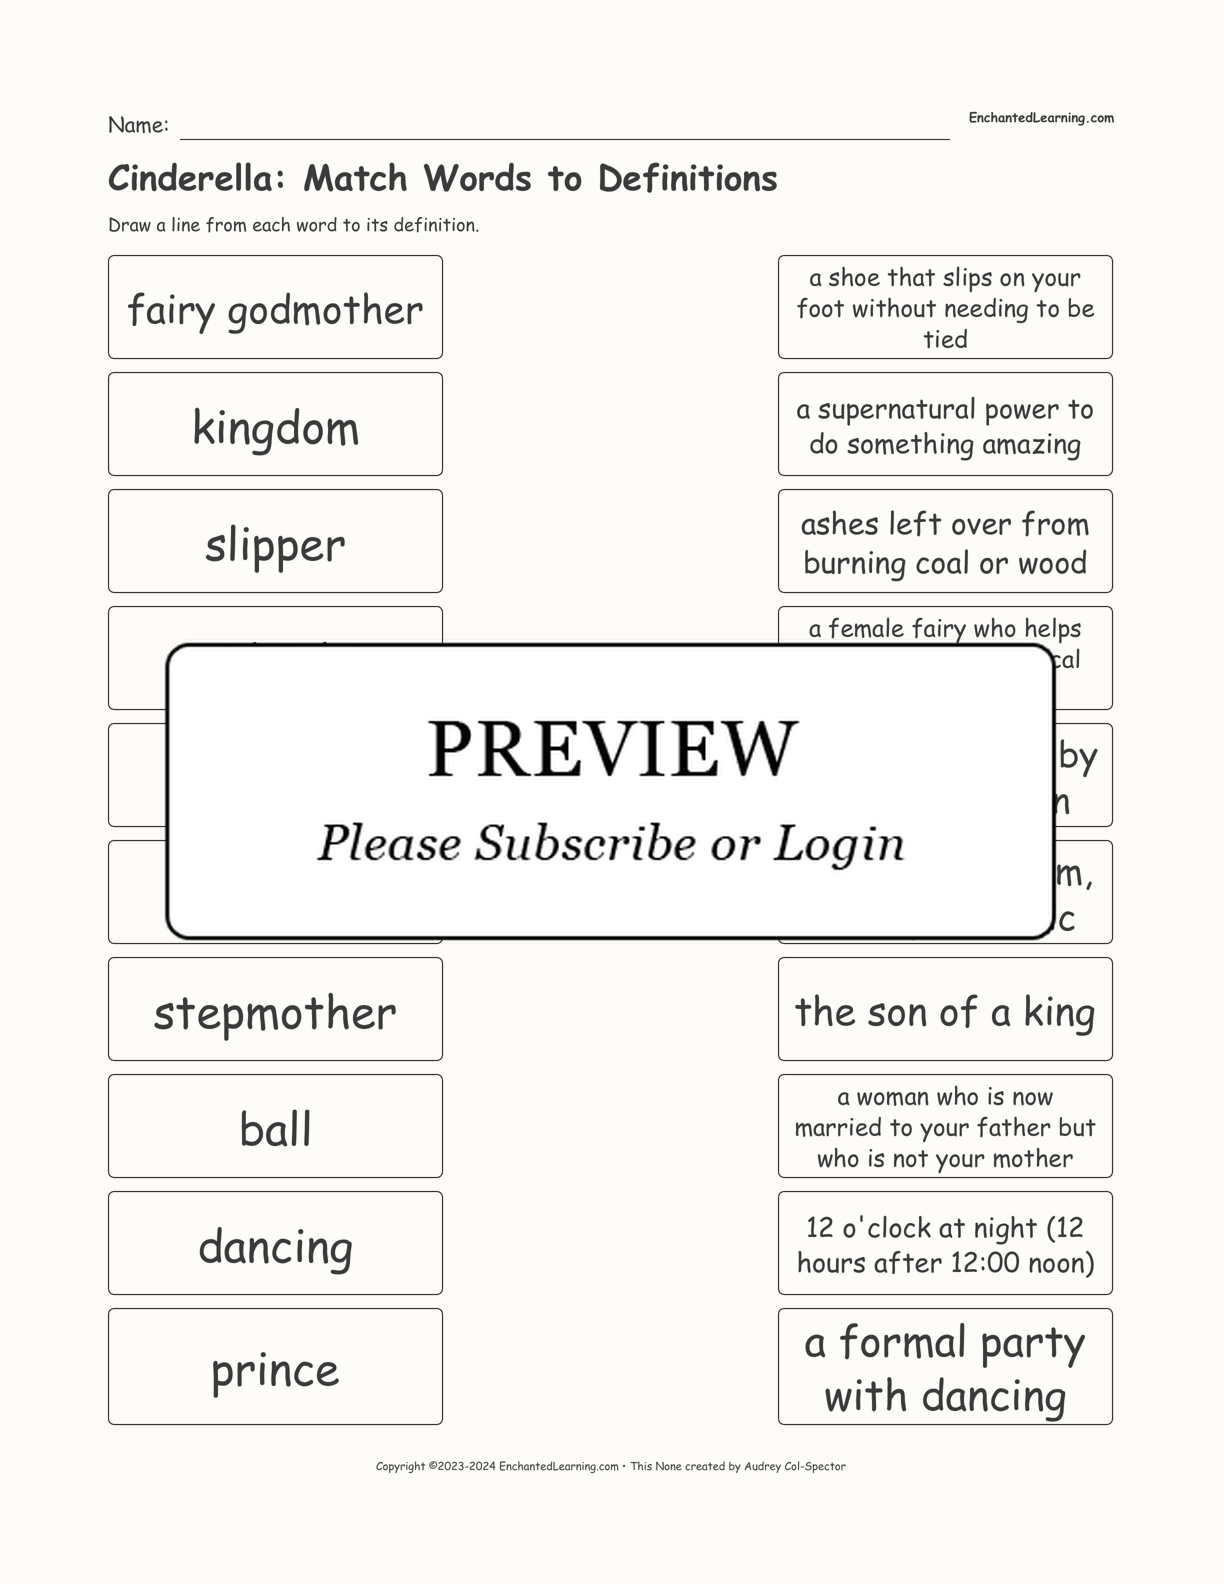 Cinderella: Match Words to Definitions interactive worksheet page 1